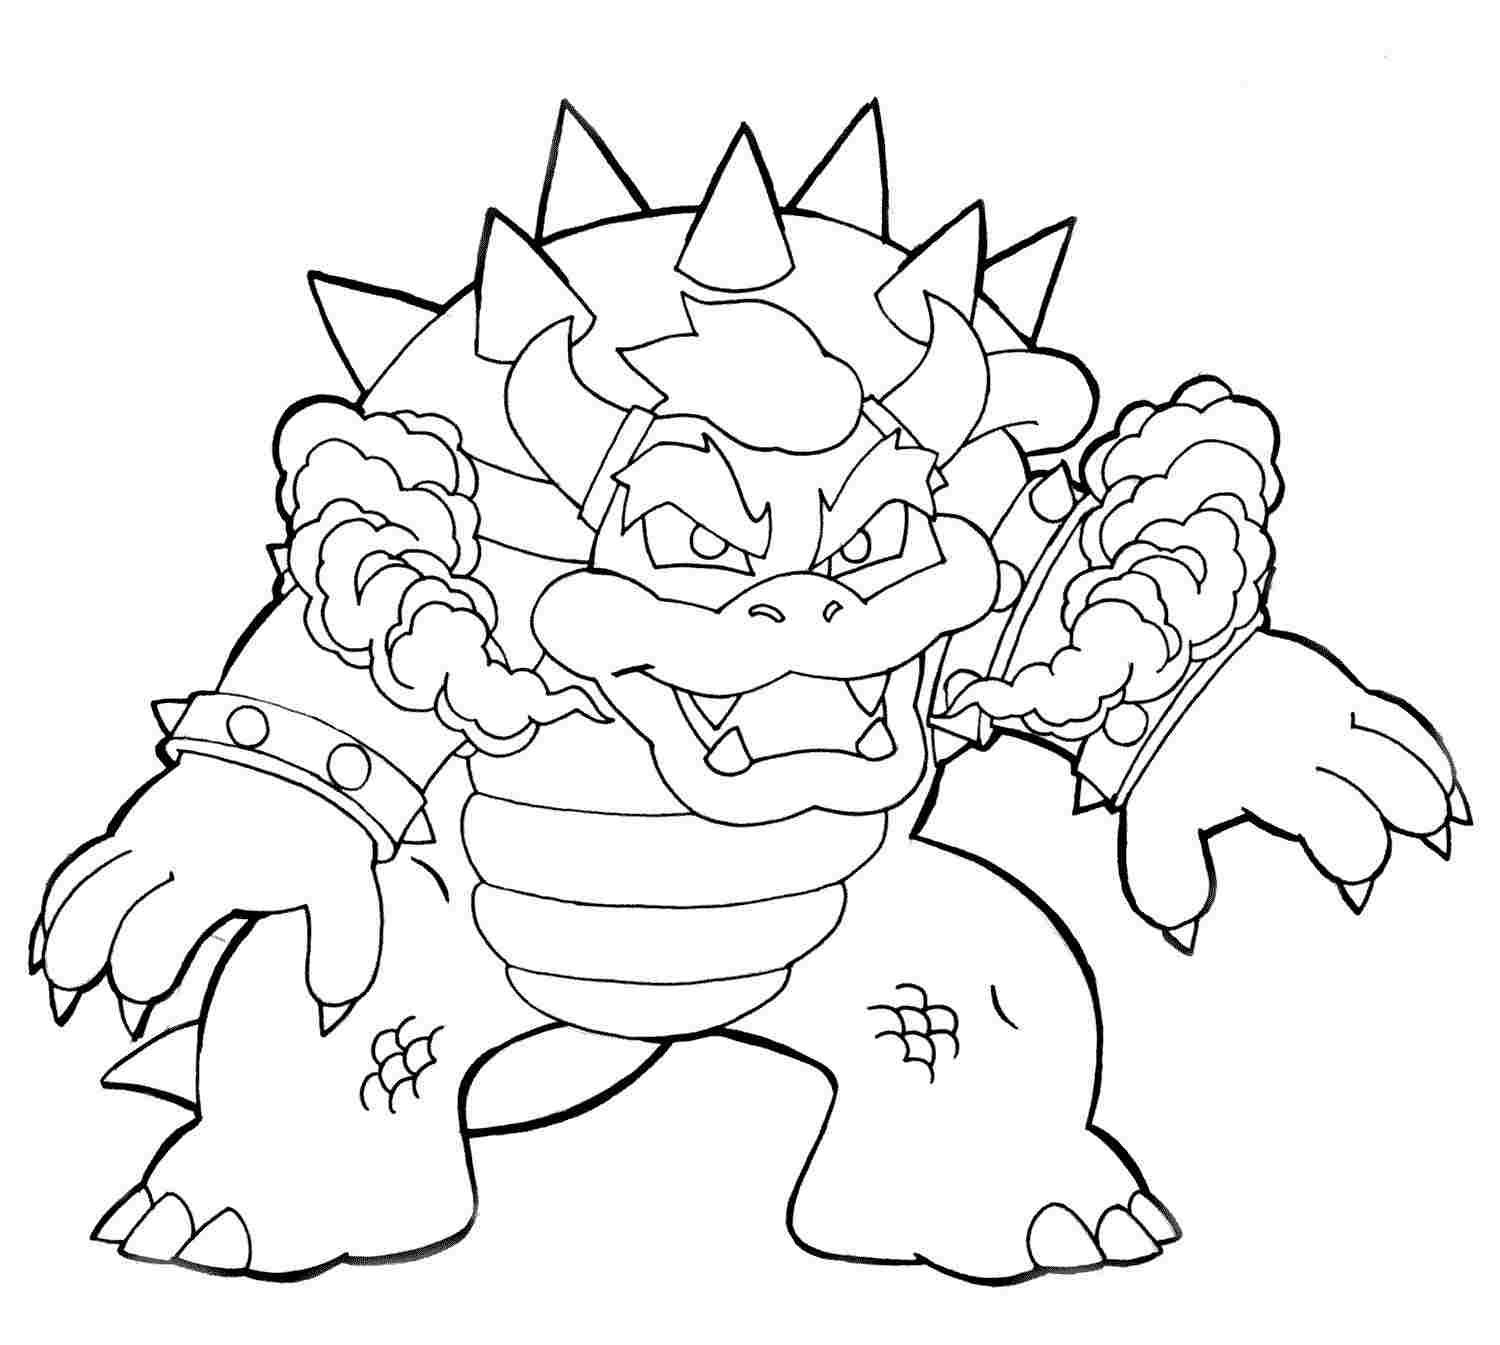 Dangerous  Bowser from Super Mario Bros Coloring Page